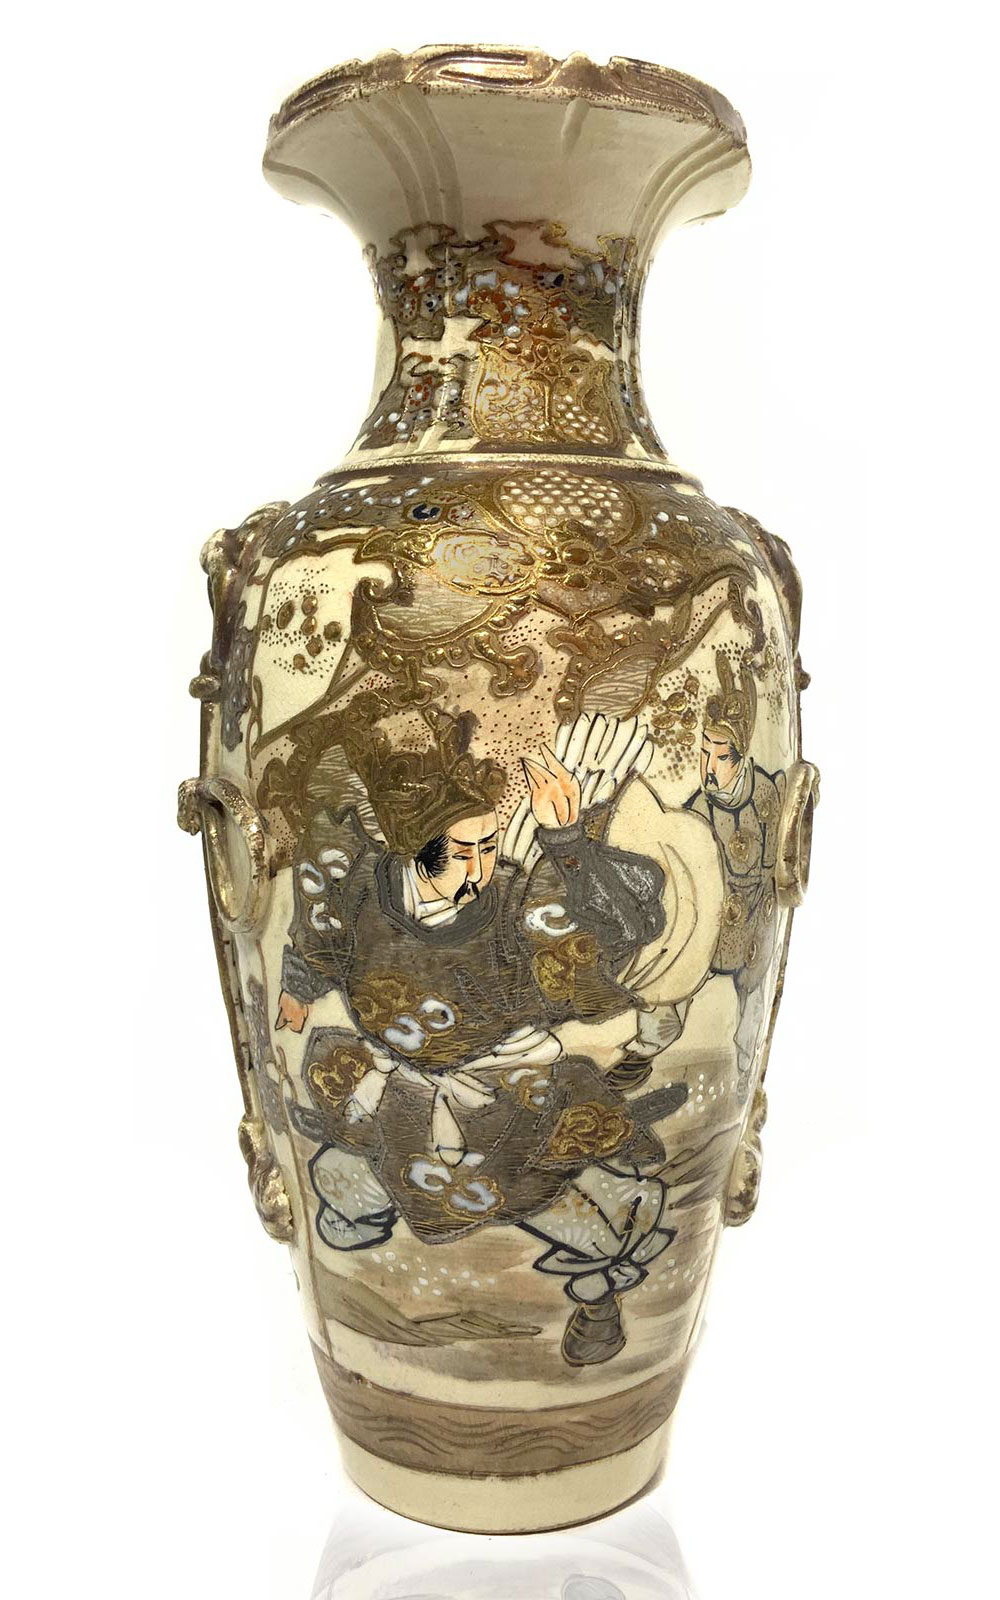 Satsuma vase. Japan. Late 19th century. With depiction of a Samurai I note and gold. H 25 Cm.